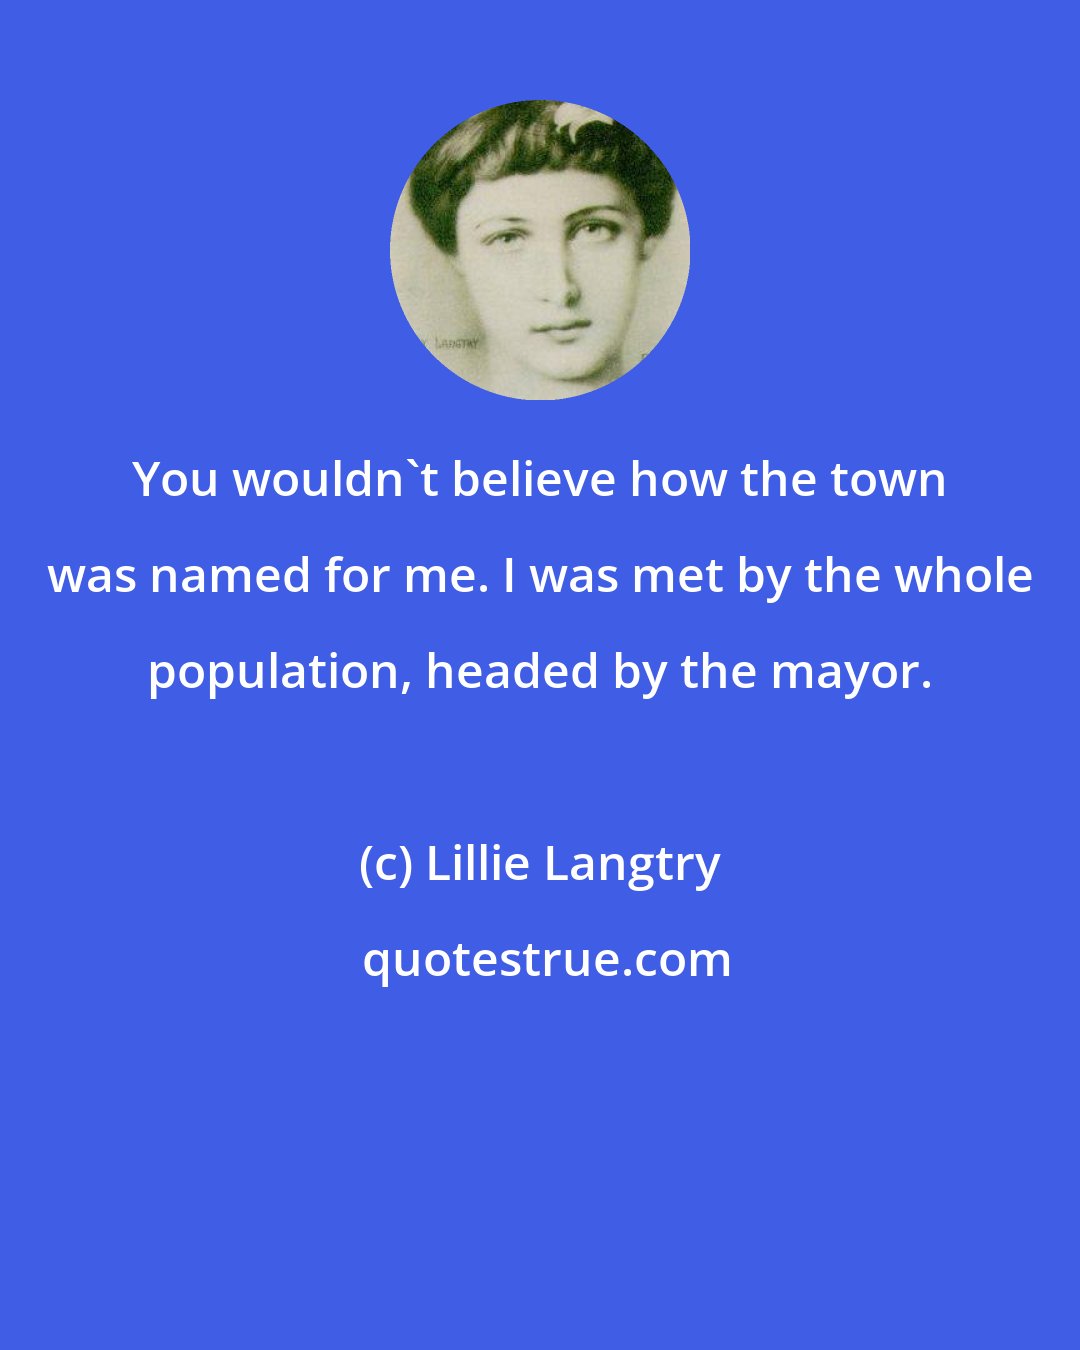 Lillie Langtry: You wouldn't believe how the town was named for me. I was met by the whole population, headed by the mayor.